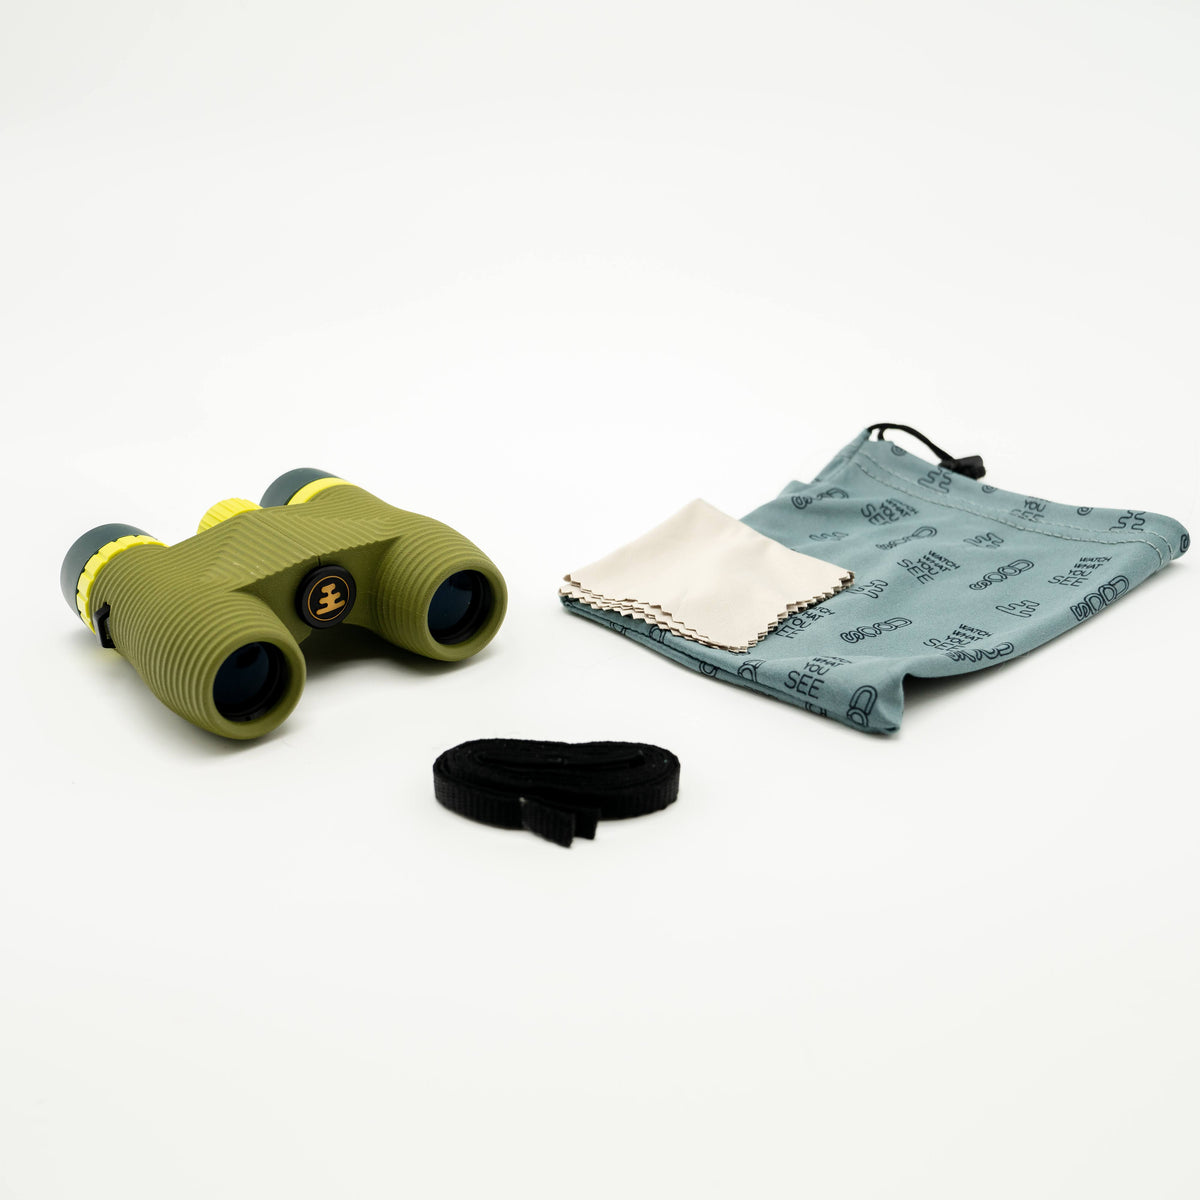 Nocs Standard Issue 10x25 Waterproof Binoculars in olive green showing the pouch and strap it comes with on a neutral background.